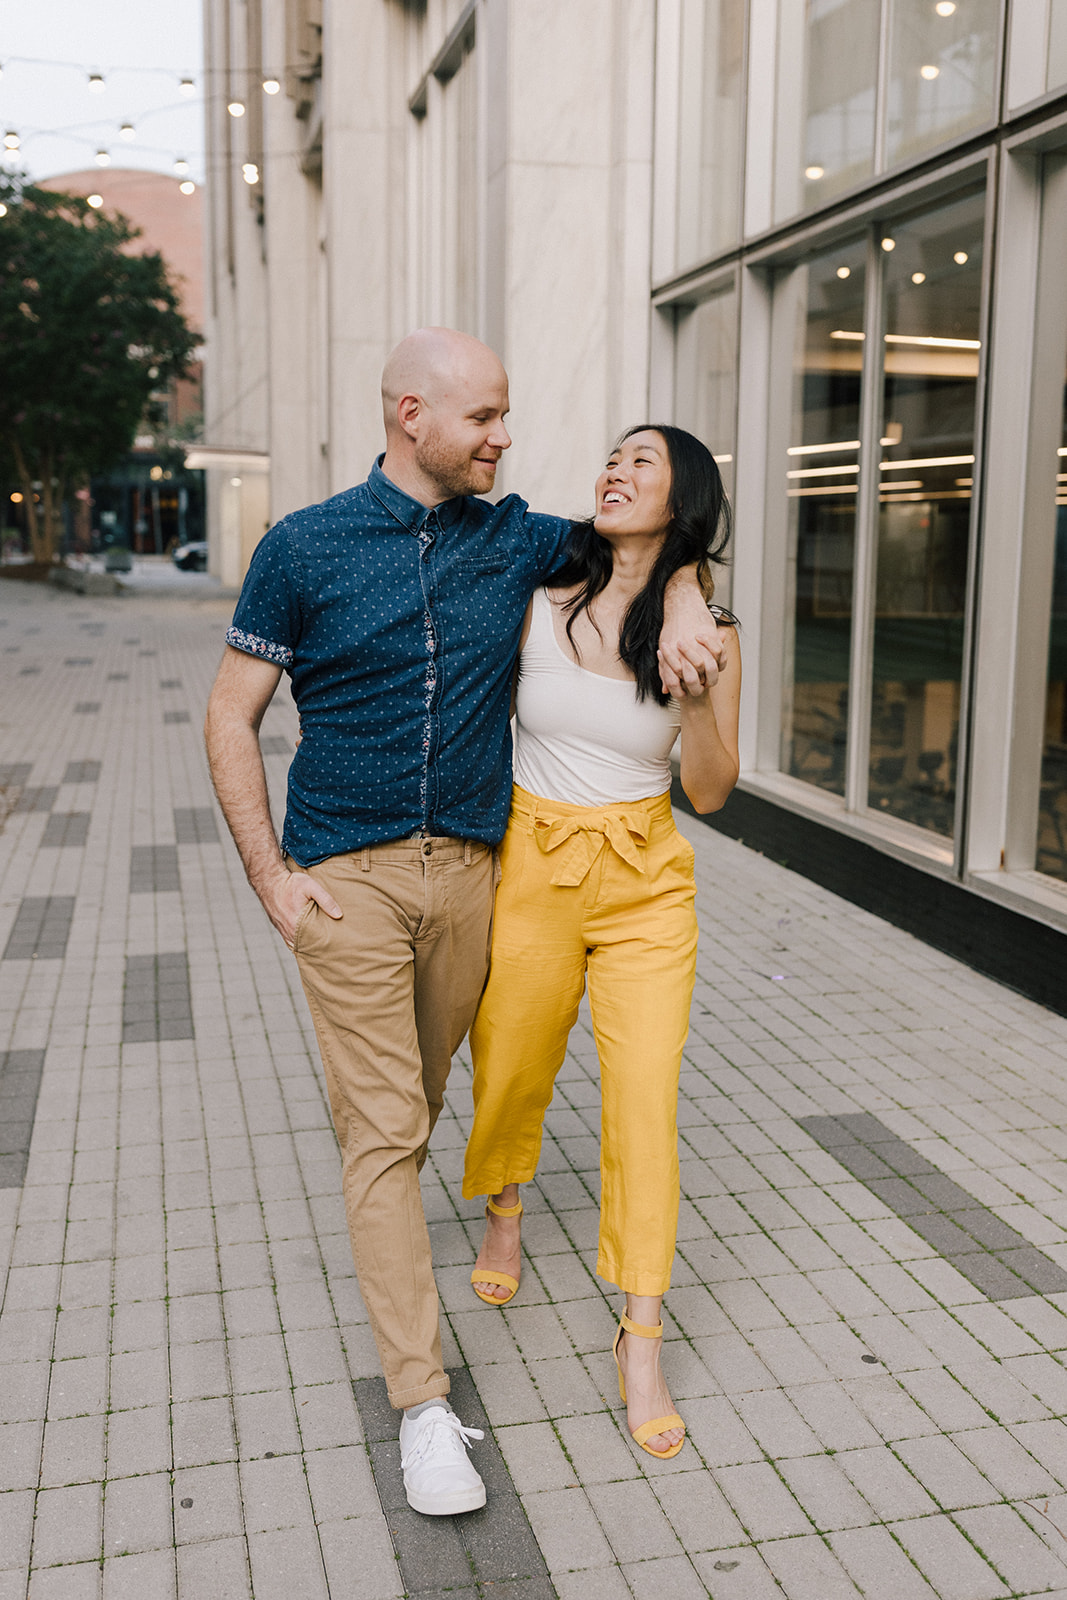 Amy Ellis Photography couples or engagement session in Downtown Raleigh and Goodberry's ice cream date, NC